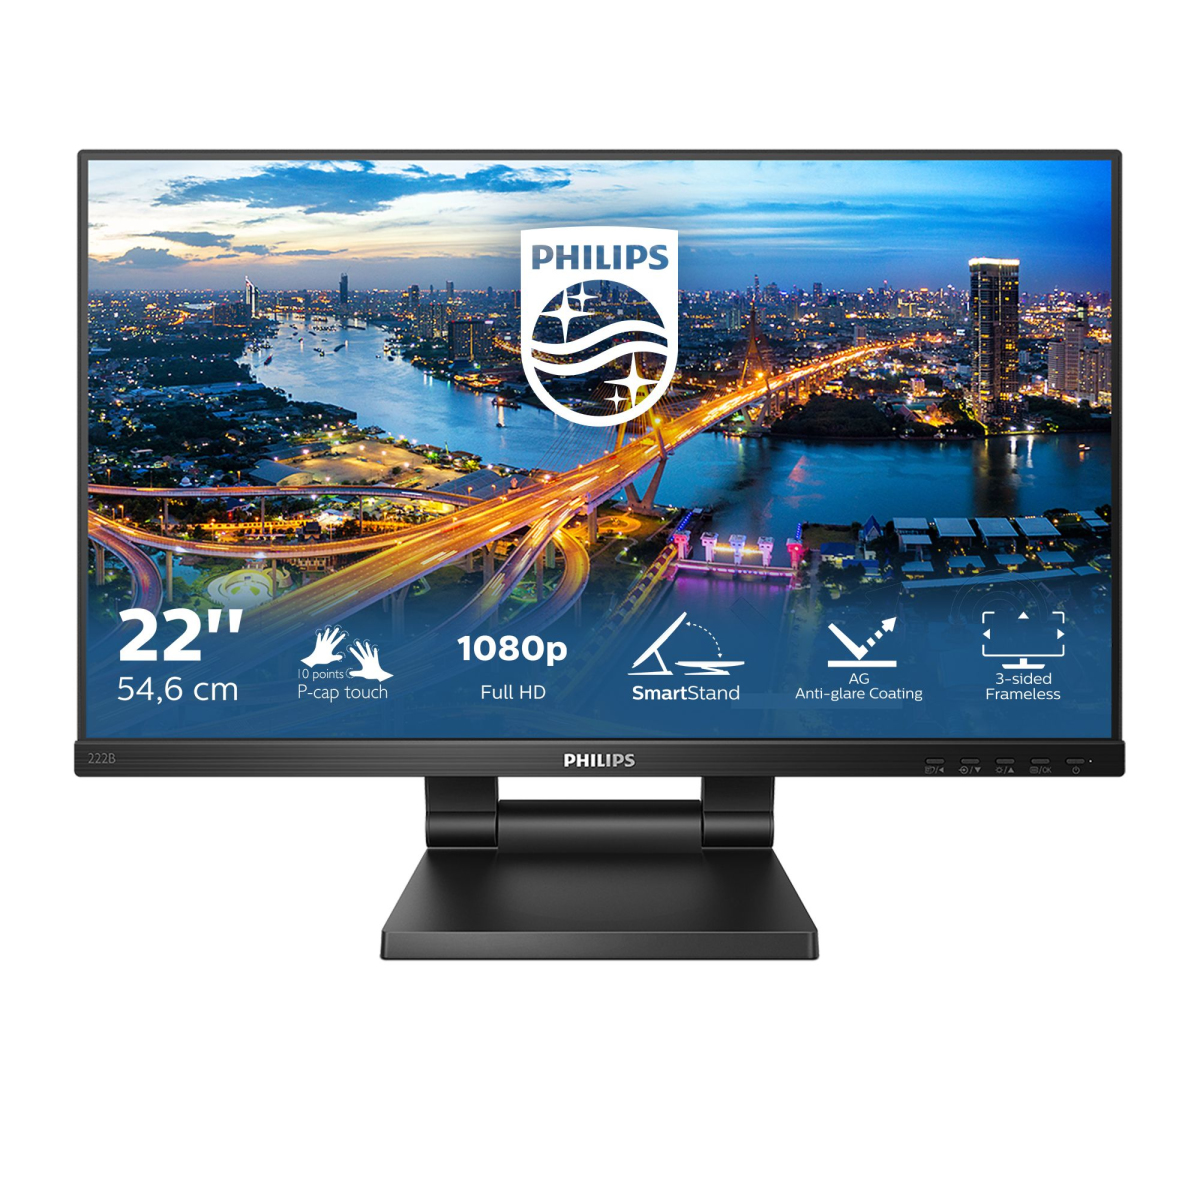 B Line LCD monitor with SmoothTouch